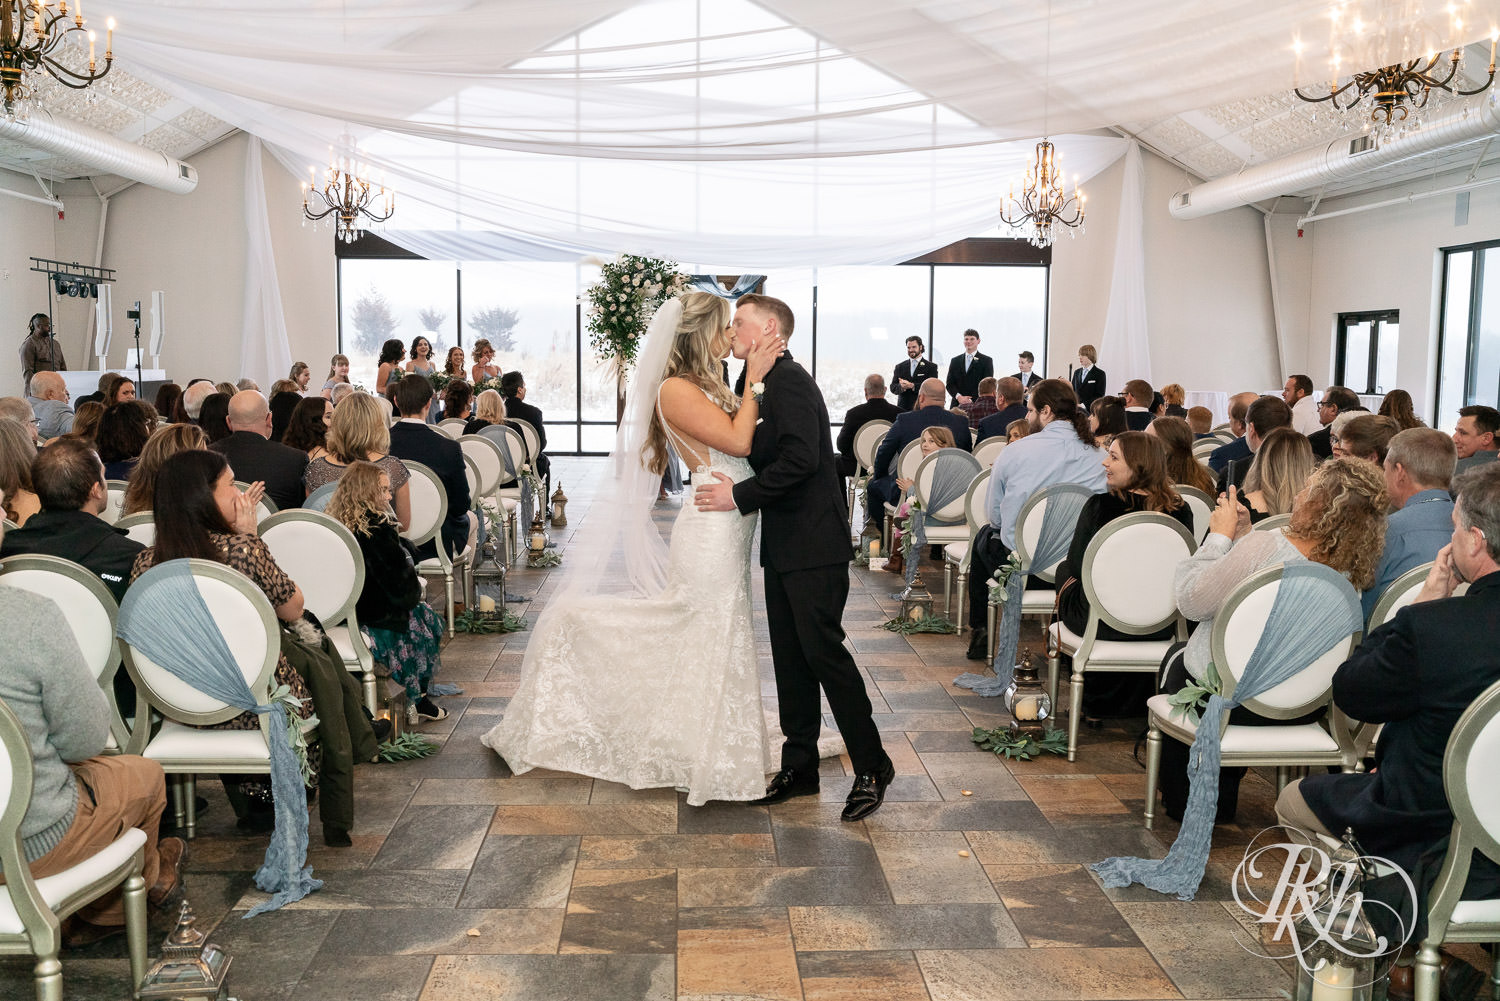 Bride and groom kiss during wedding ceremony at Bavaria Downs in Chaska, Minnesota.